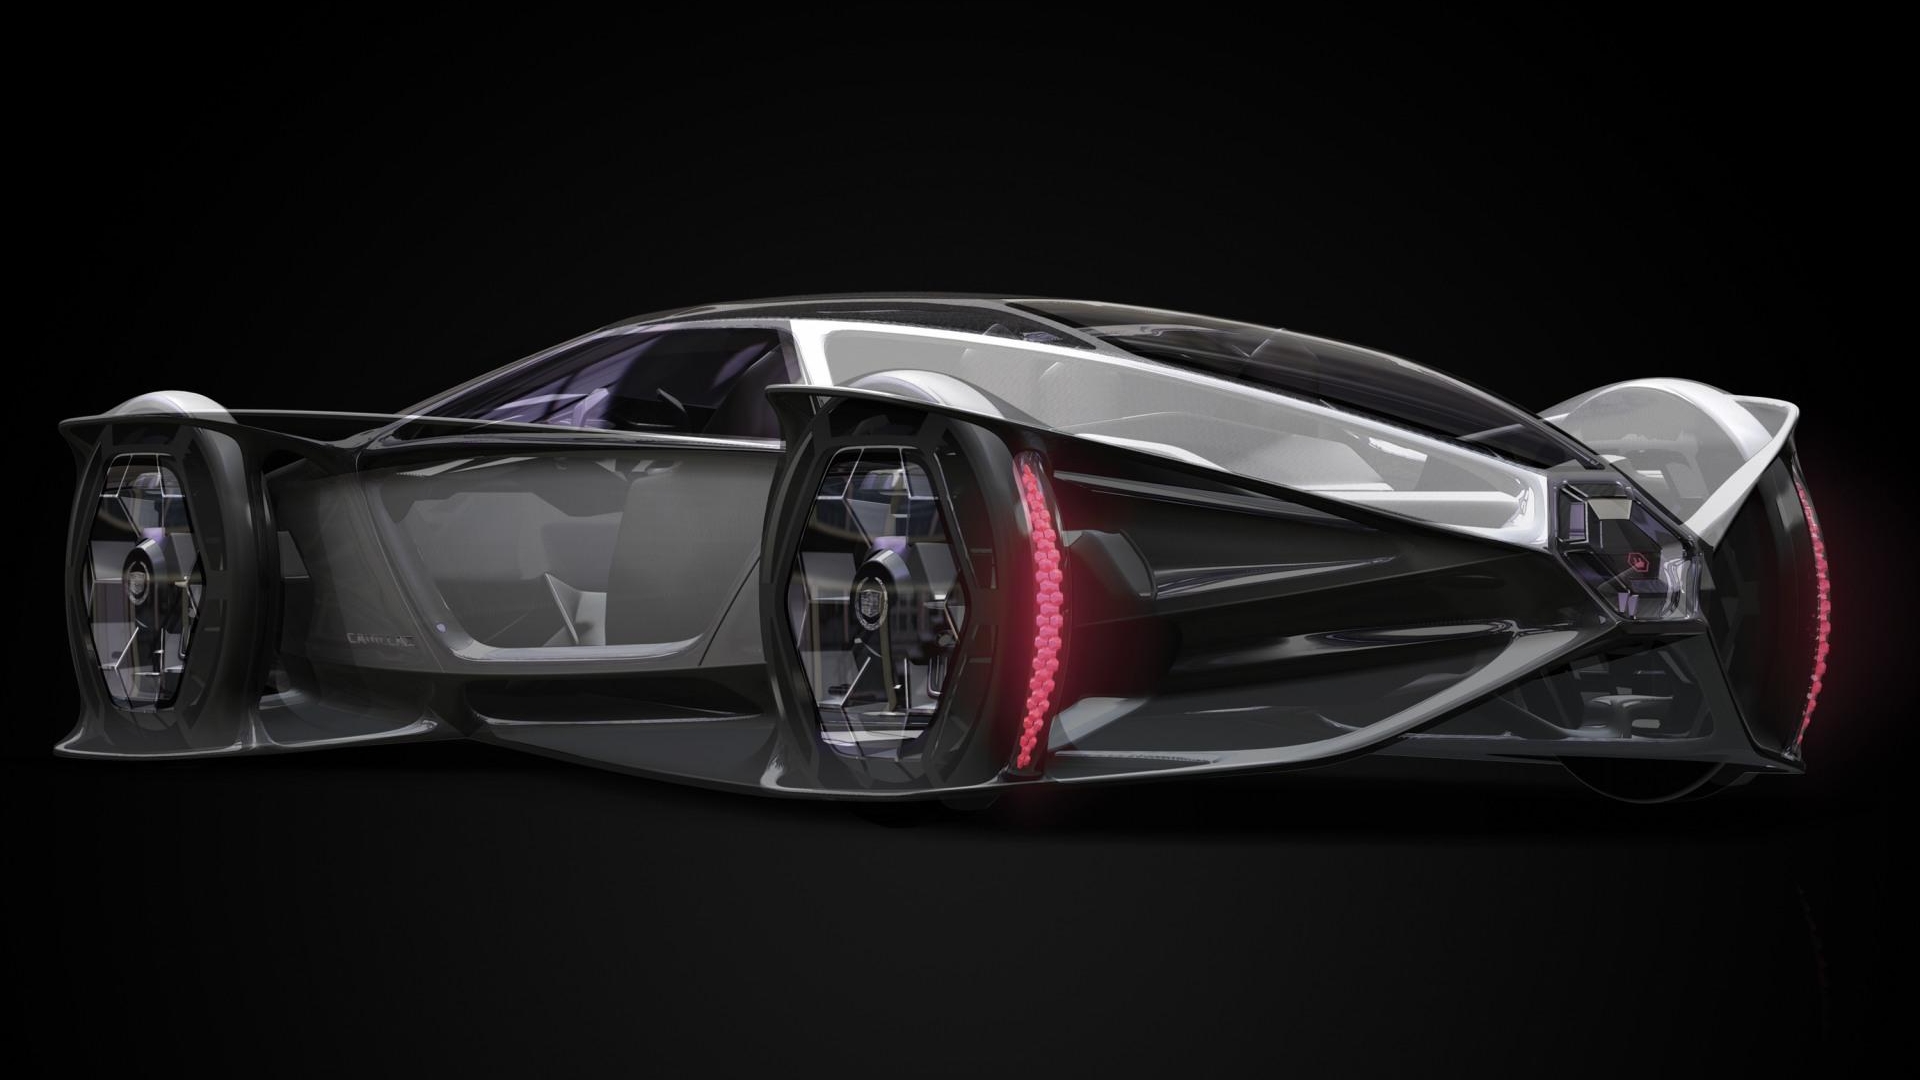 A sleek Cadillac vehicle named Aera in a breathtaking desktop wallpaper. Ideal for car enthusiasts.